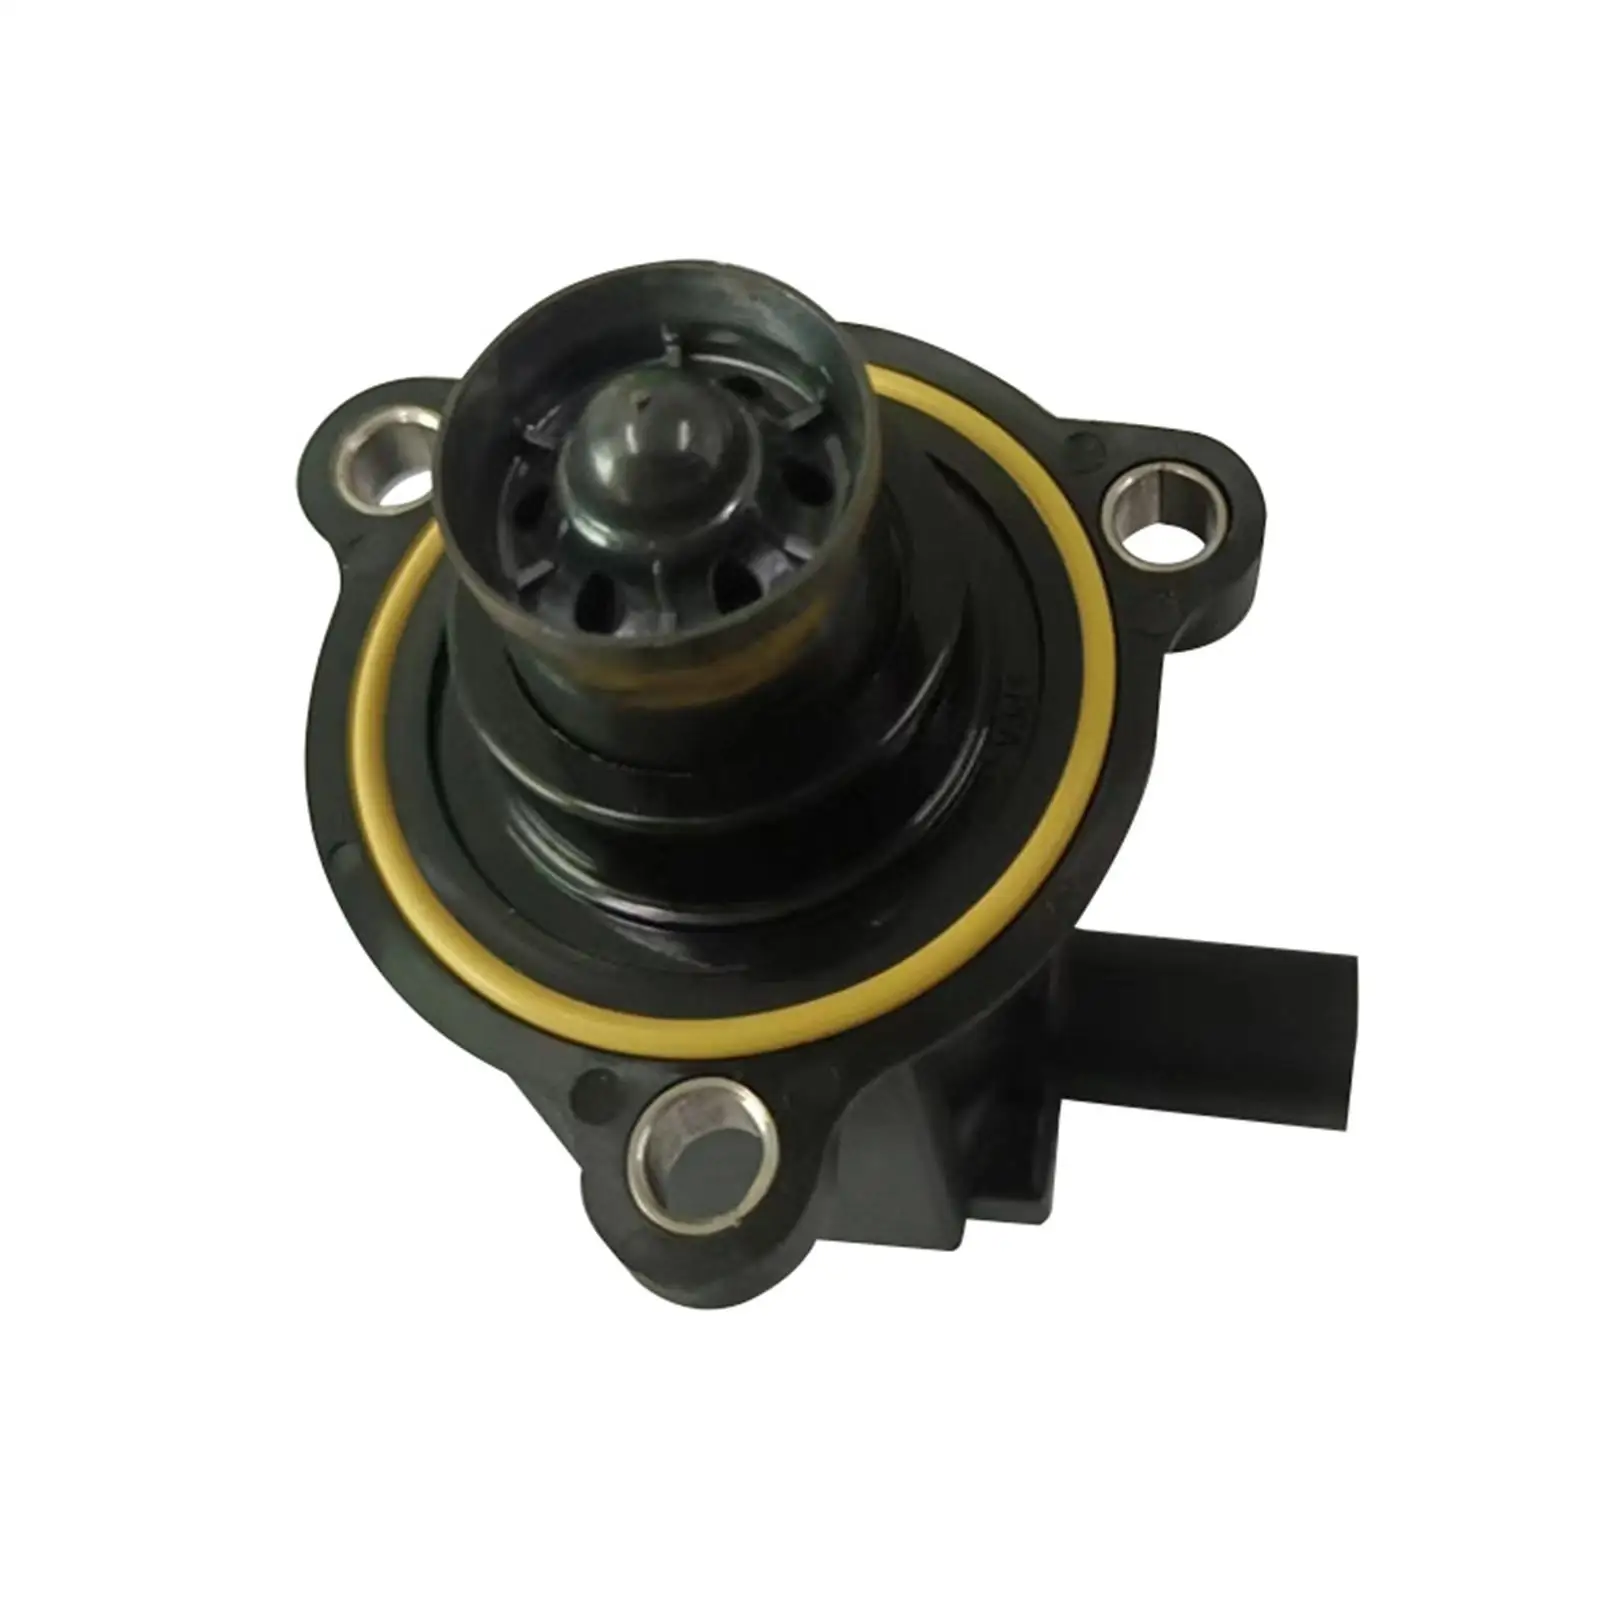 Turbocharger Valve Professional Accessory Spare Parts Replaces Easy to Install